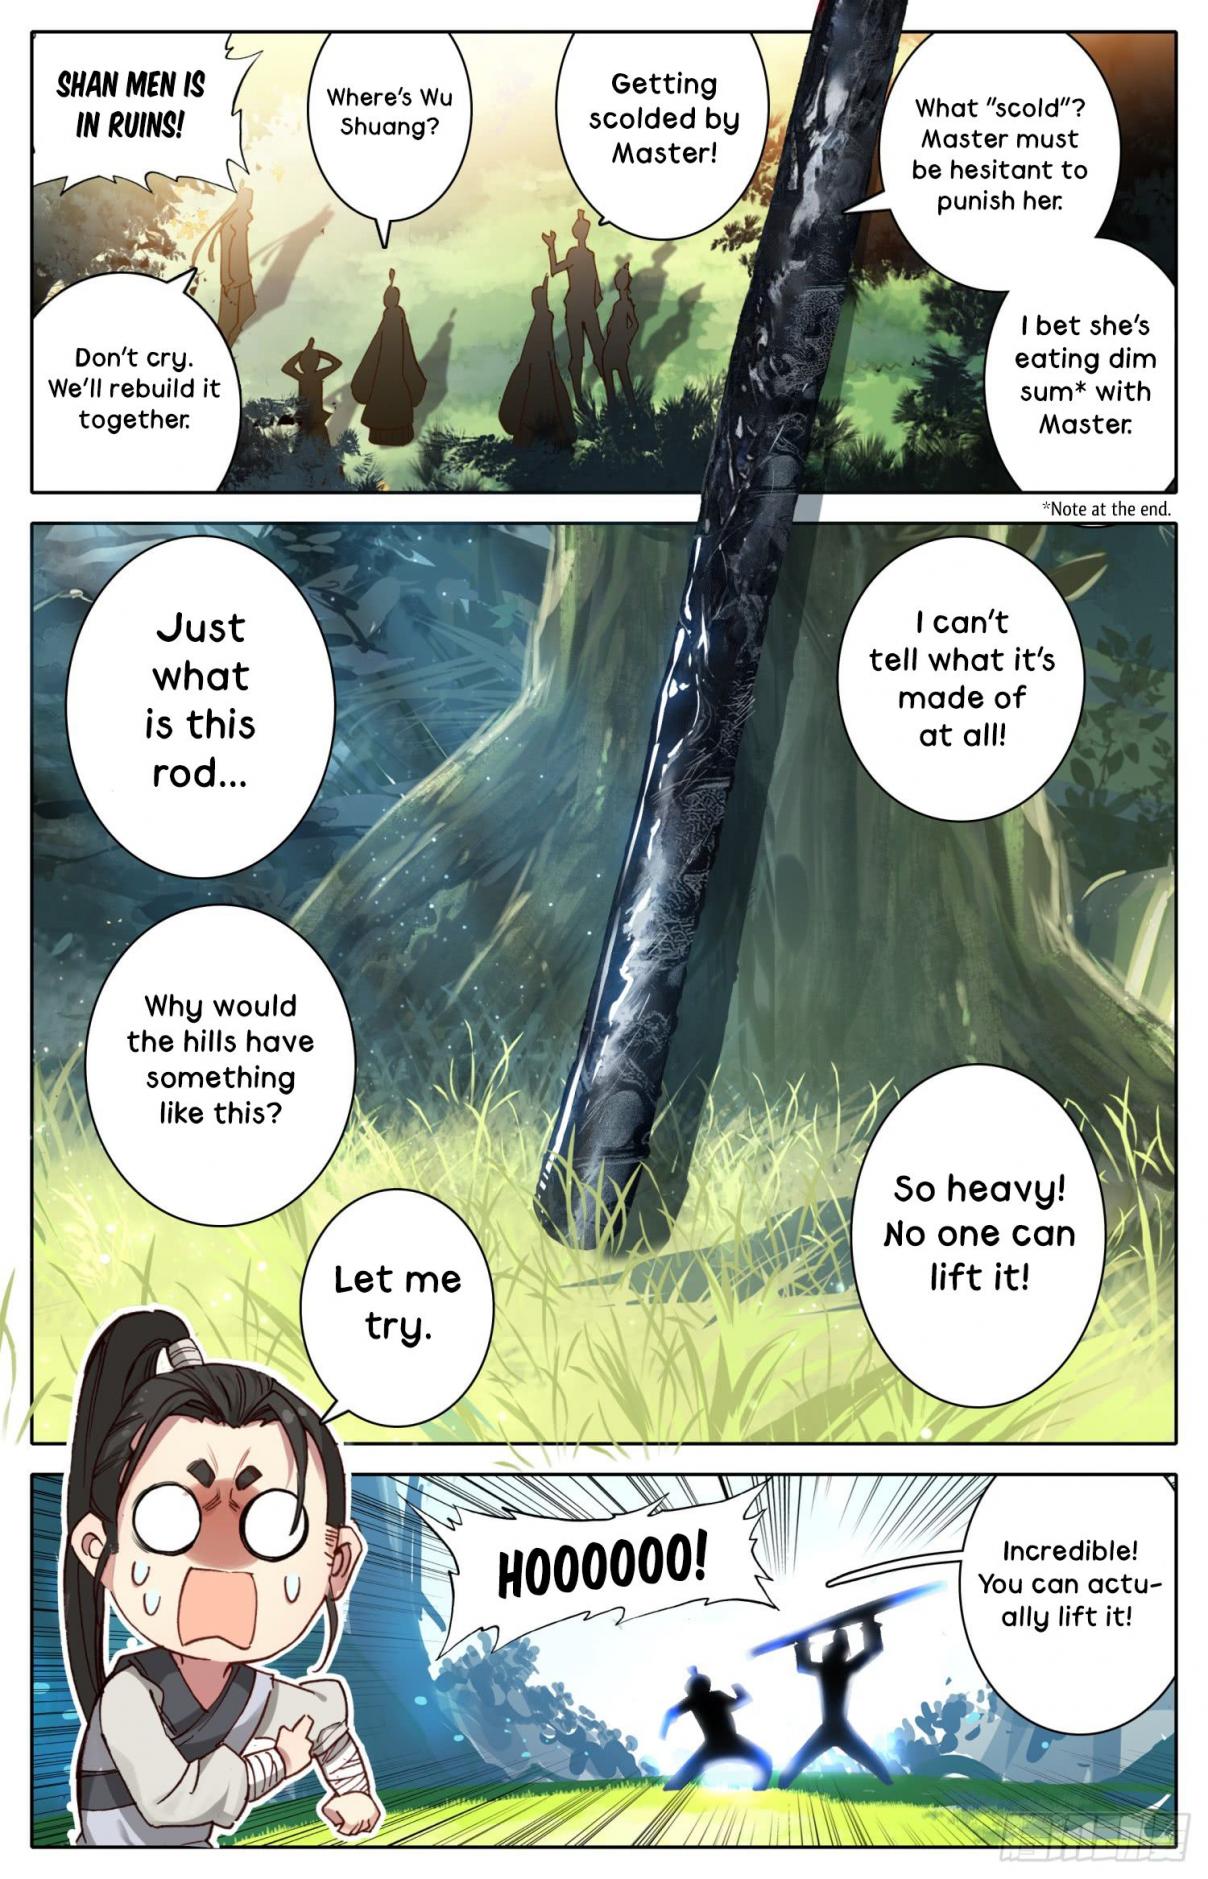 Legend of the Tyrant Empress Chap 30